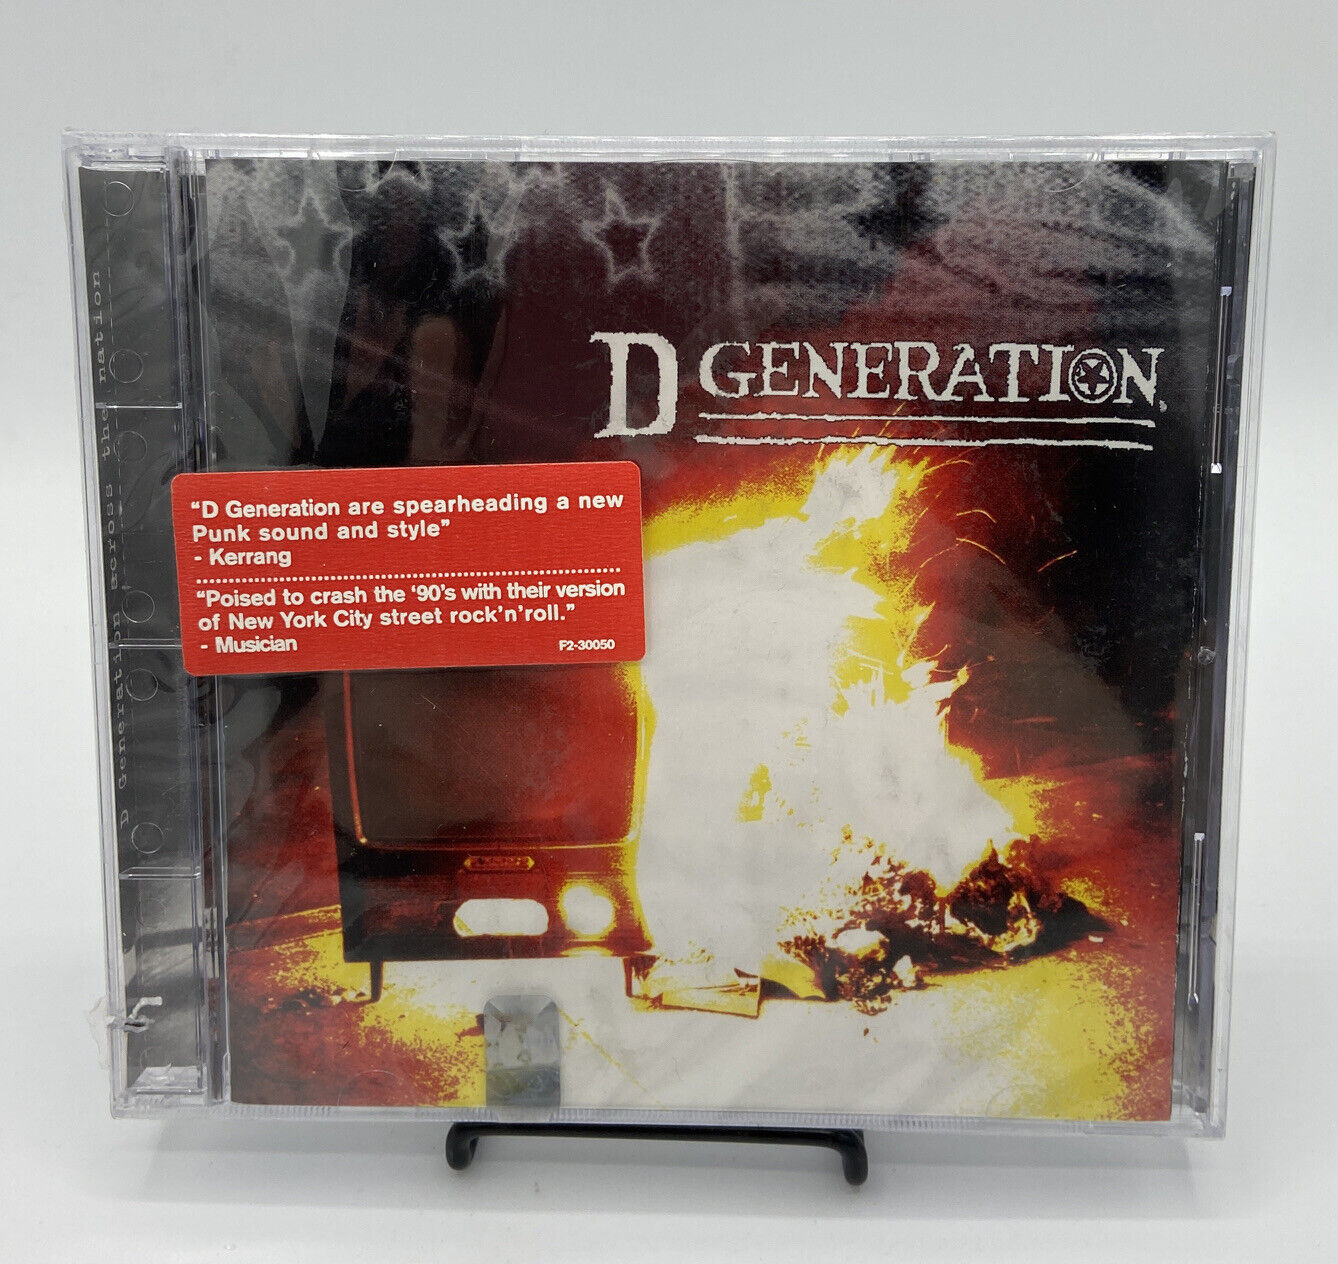 D Generation by D Generation (CD, Oct-1994, Chrysalis Records) New Sealed OOP